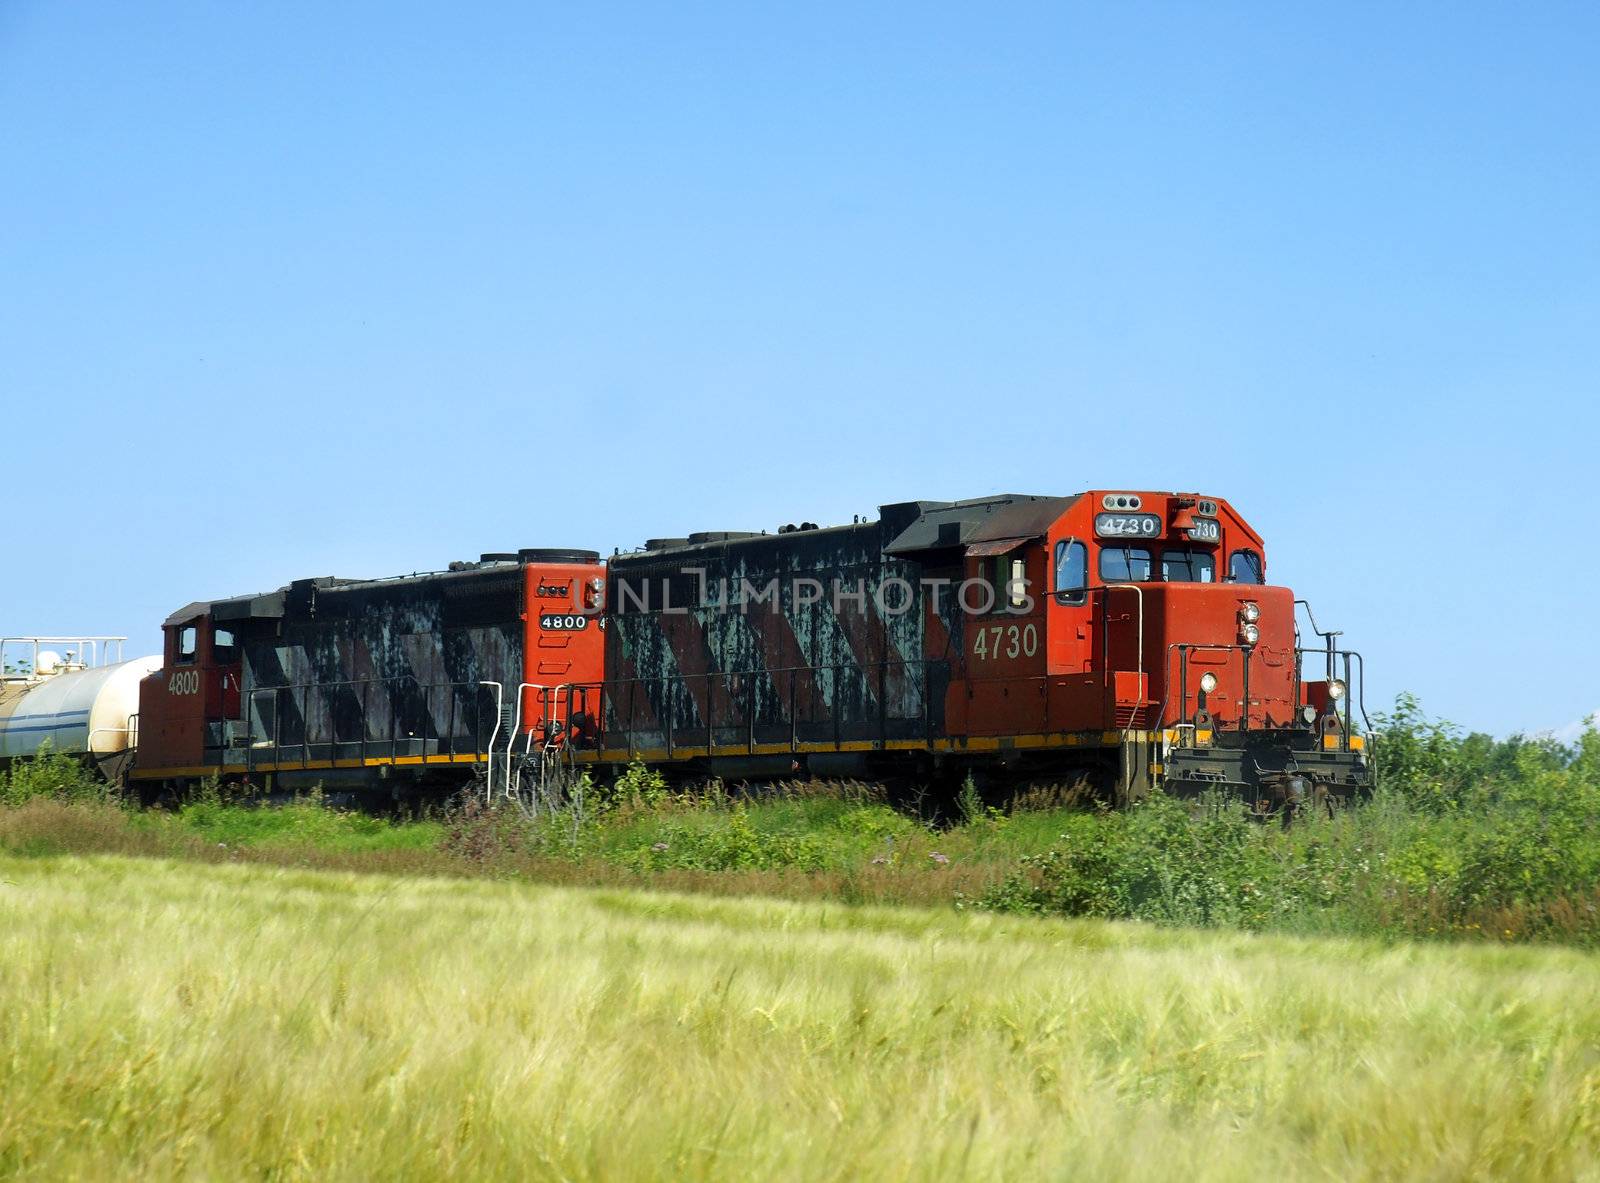 Two old freight or cargo locomotives going through farmland or prairies to deliver products and merchandises.